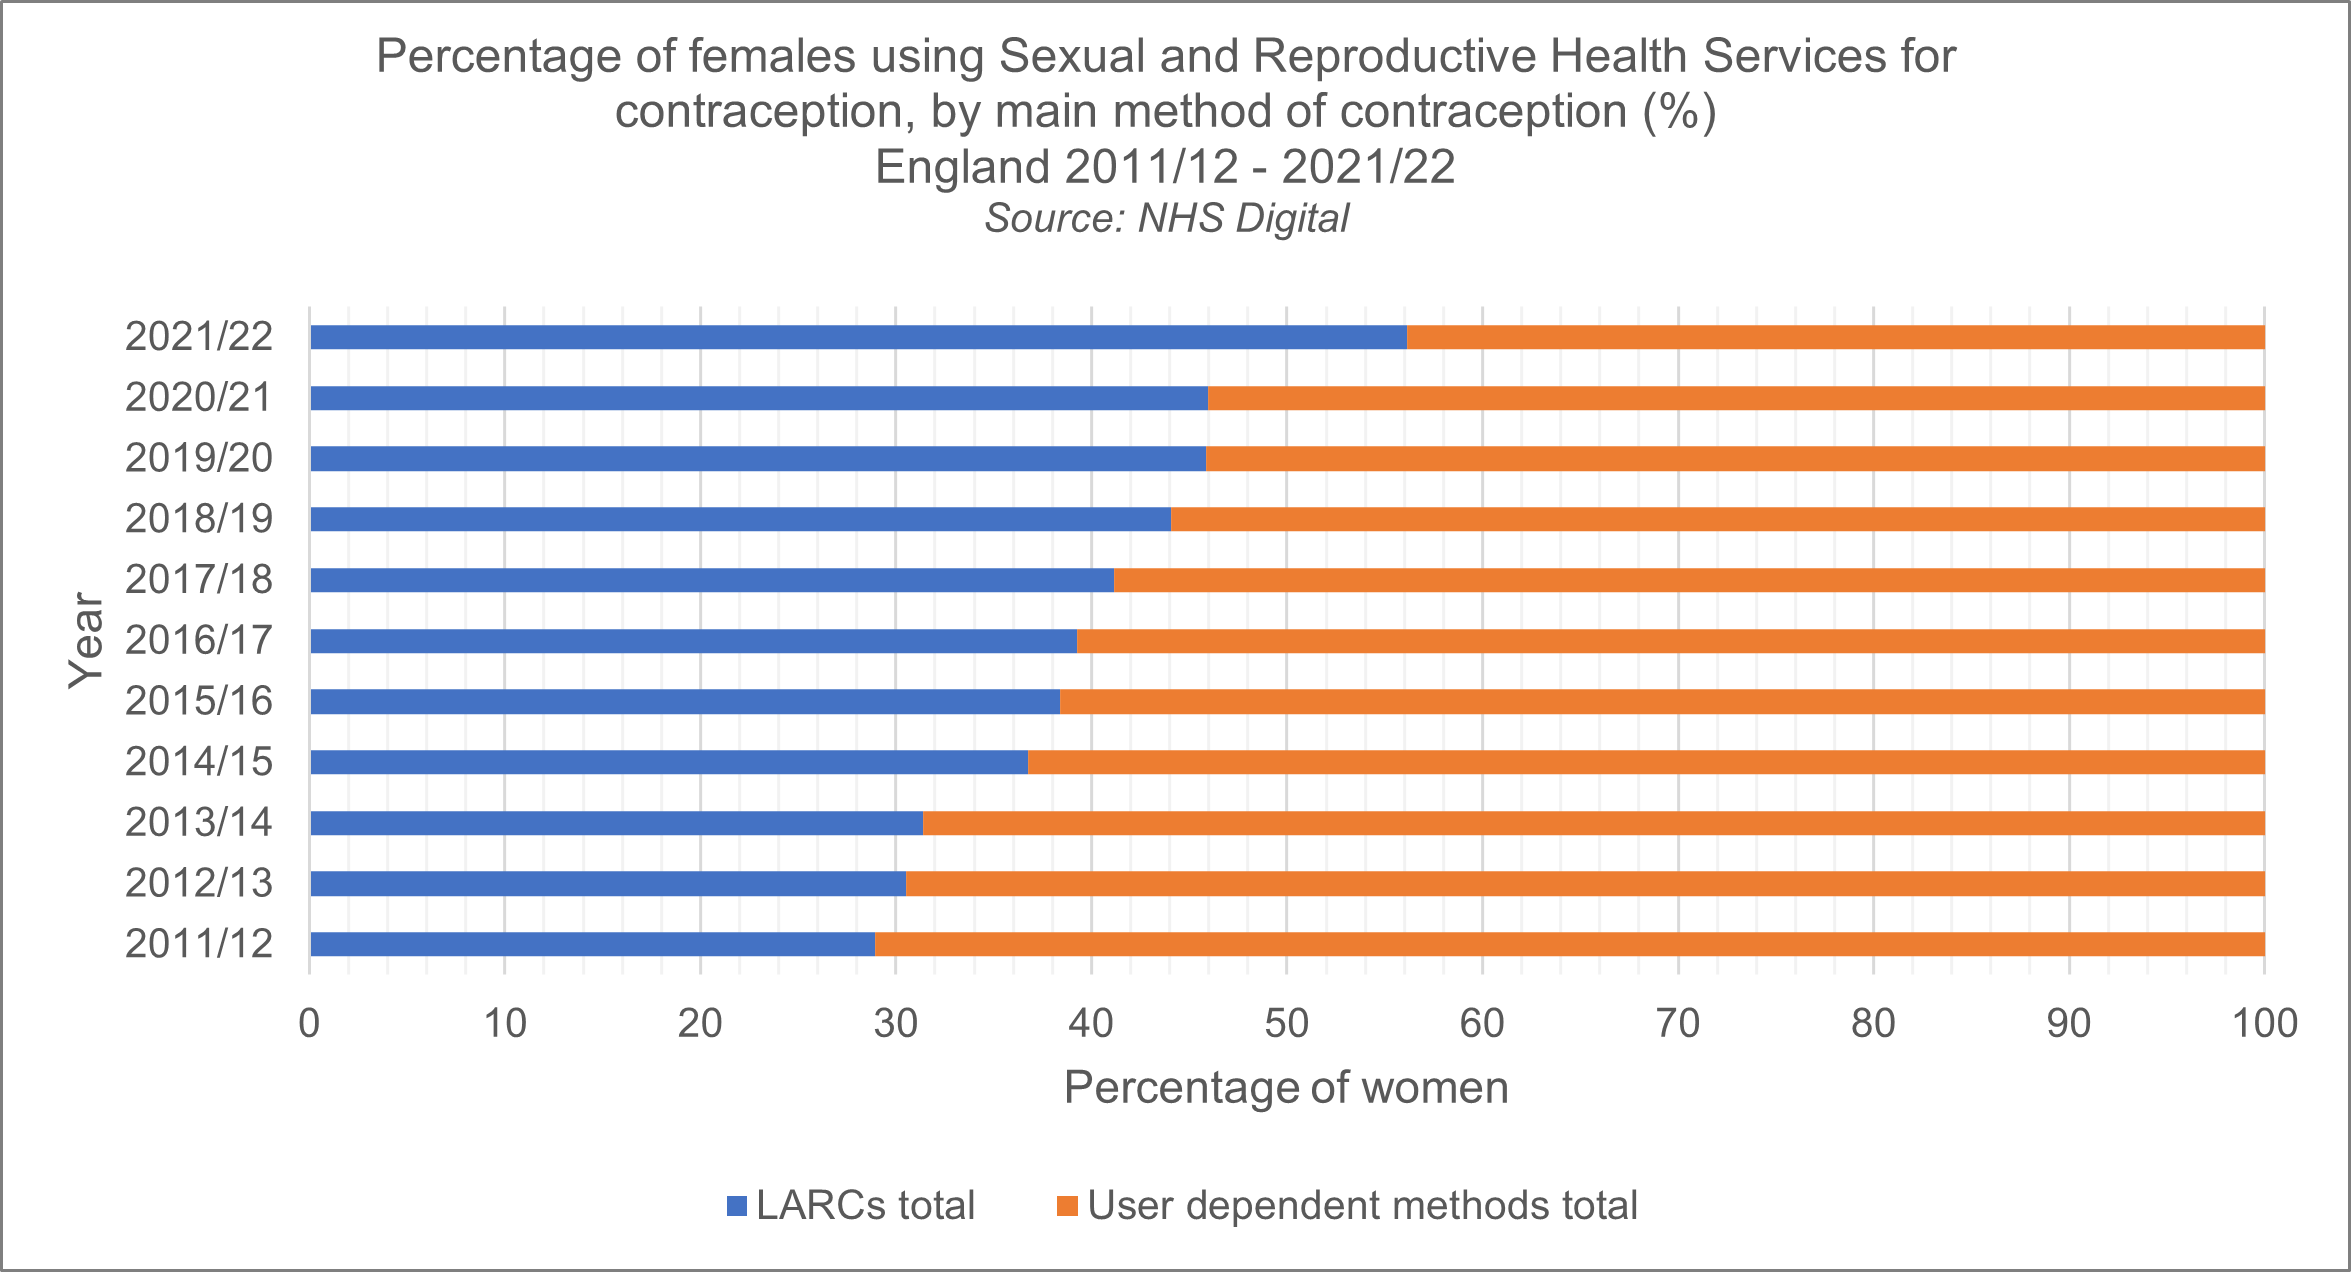 Between 2011/2012, the proportion of women choosing Long-Acting Reversible Contraceptives (LARCs) as their main method of contraception has increased from approximately 28% in 2011/12 to 56% in 2021/22. The proportion of women choosing user dependent methods (e.g. condom, the combined oral contraceptive) has decreased from 71% in 2011/12 to 44% in 2021/22.